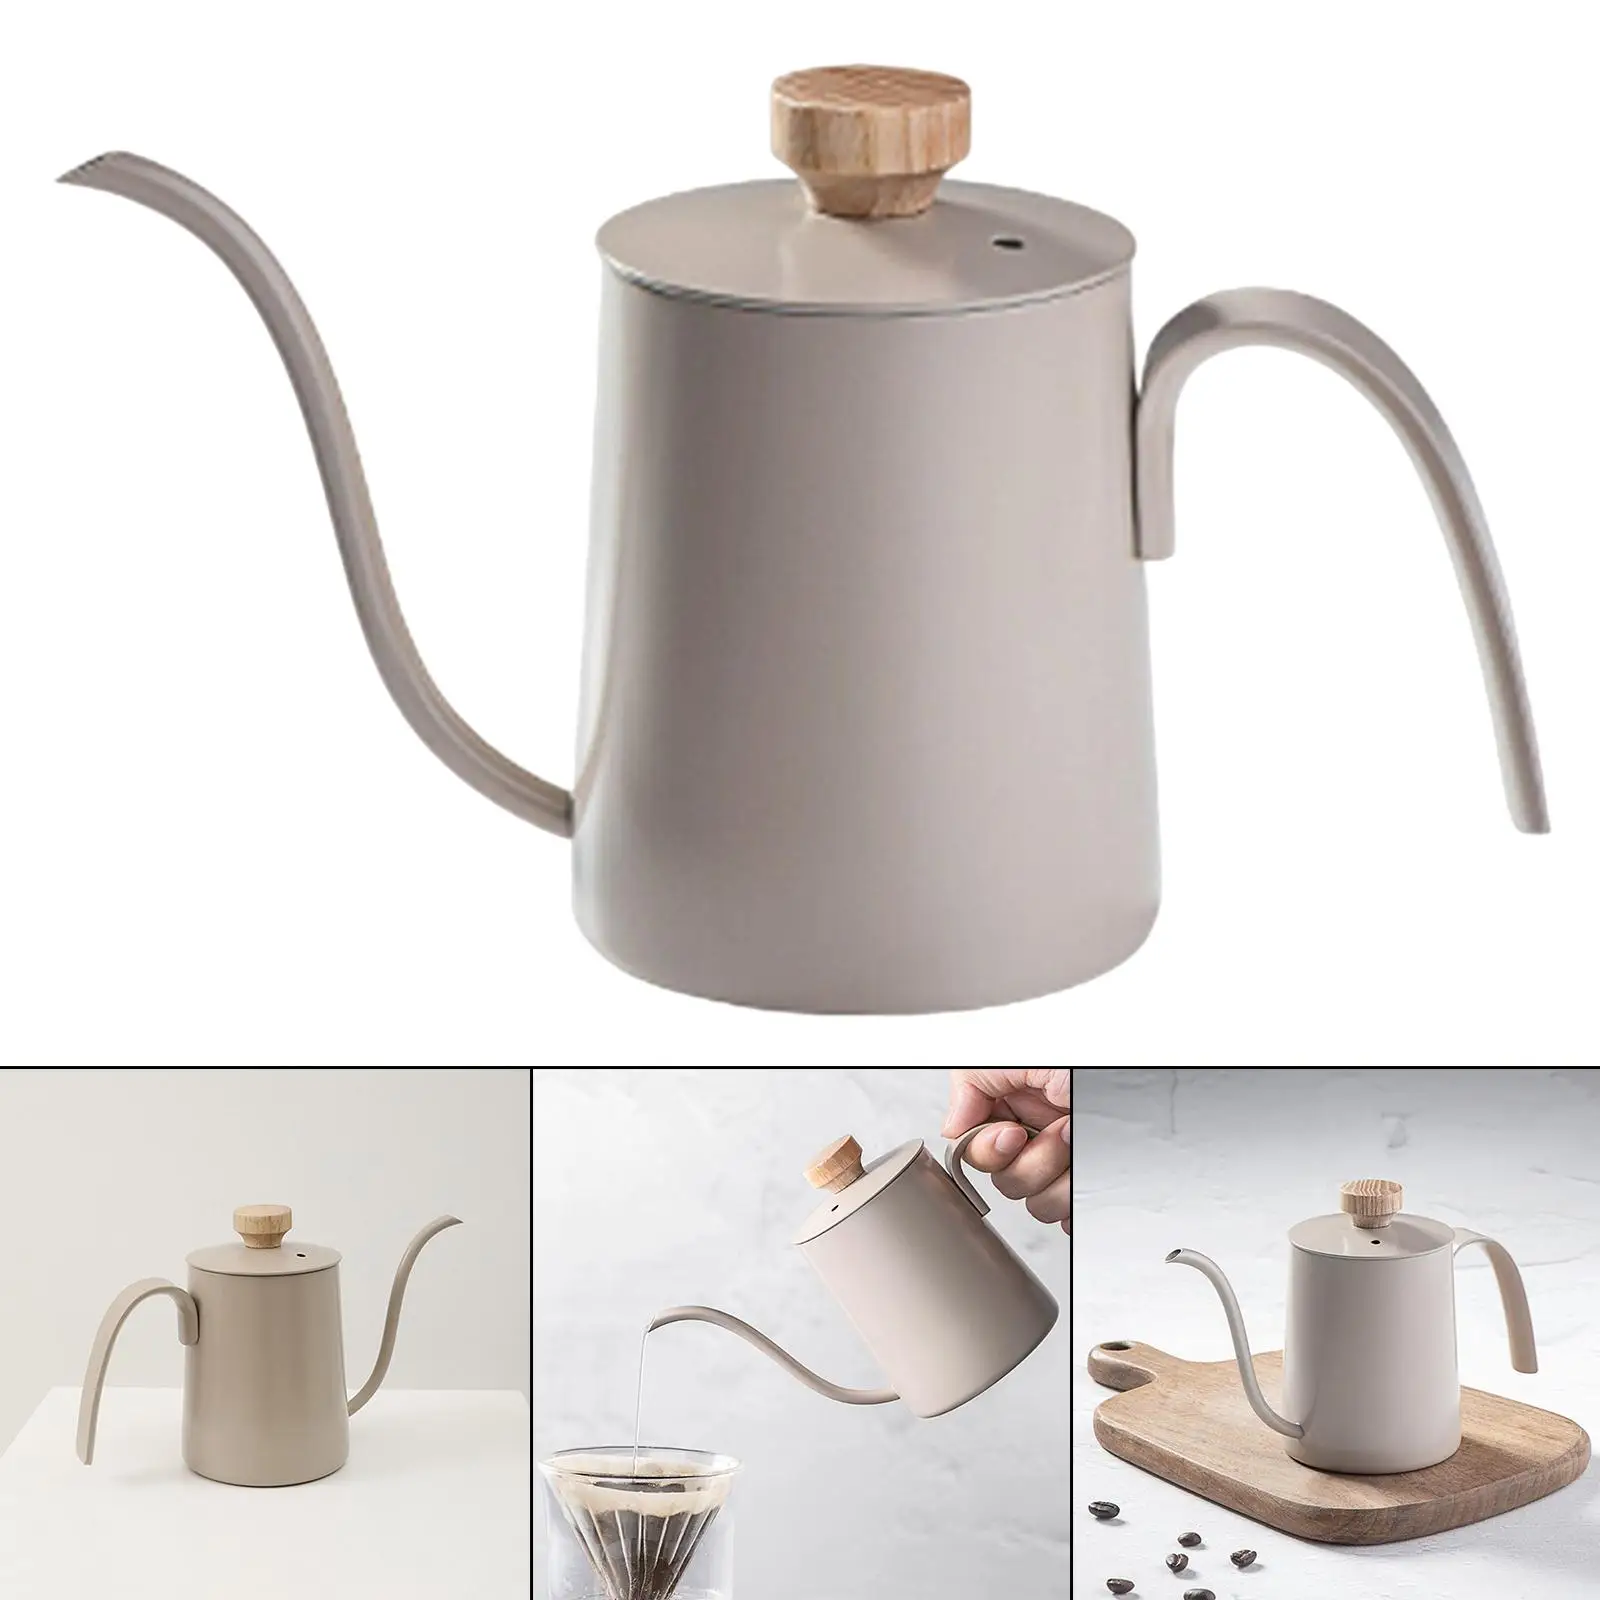 Stainless Steel Coffee Kettle Coffee Maker Kettle Gooseneck Narrow Ergonomic Handle 350ml Pour Over Kettle for Home Cafe Kitchen